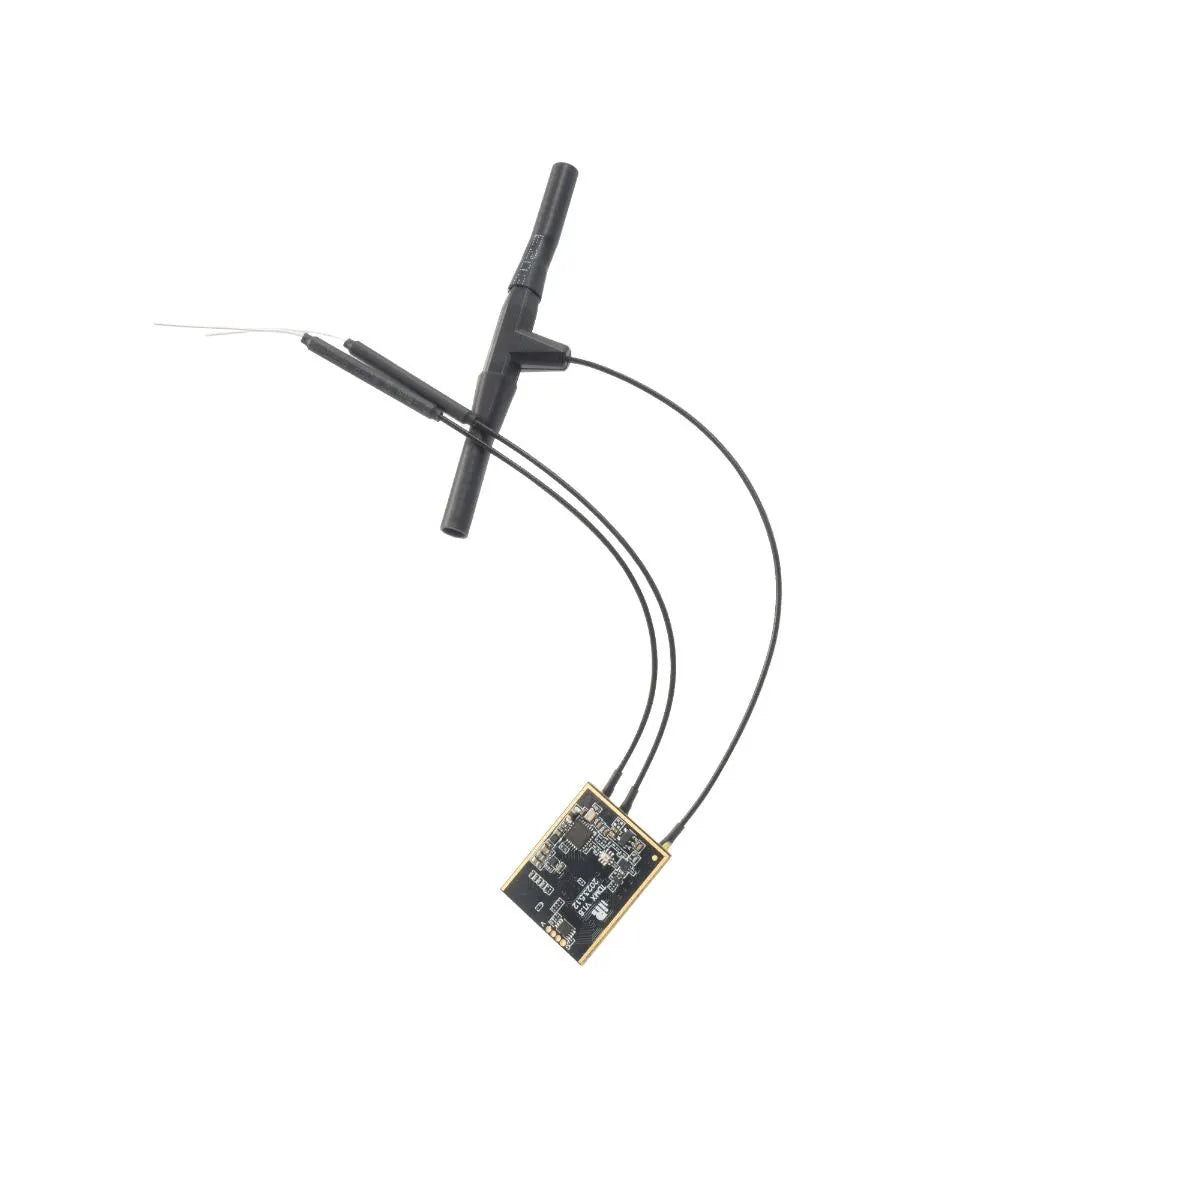 FrSky TD MX Receiver - 2.4G 900M Tandem Dual-Band Receiver 4 PWM channels